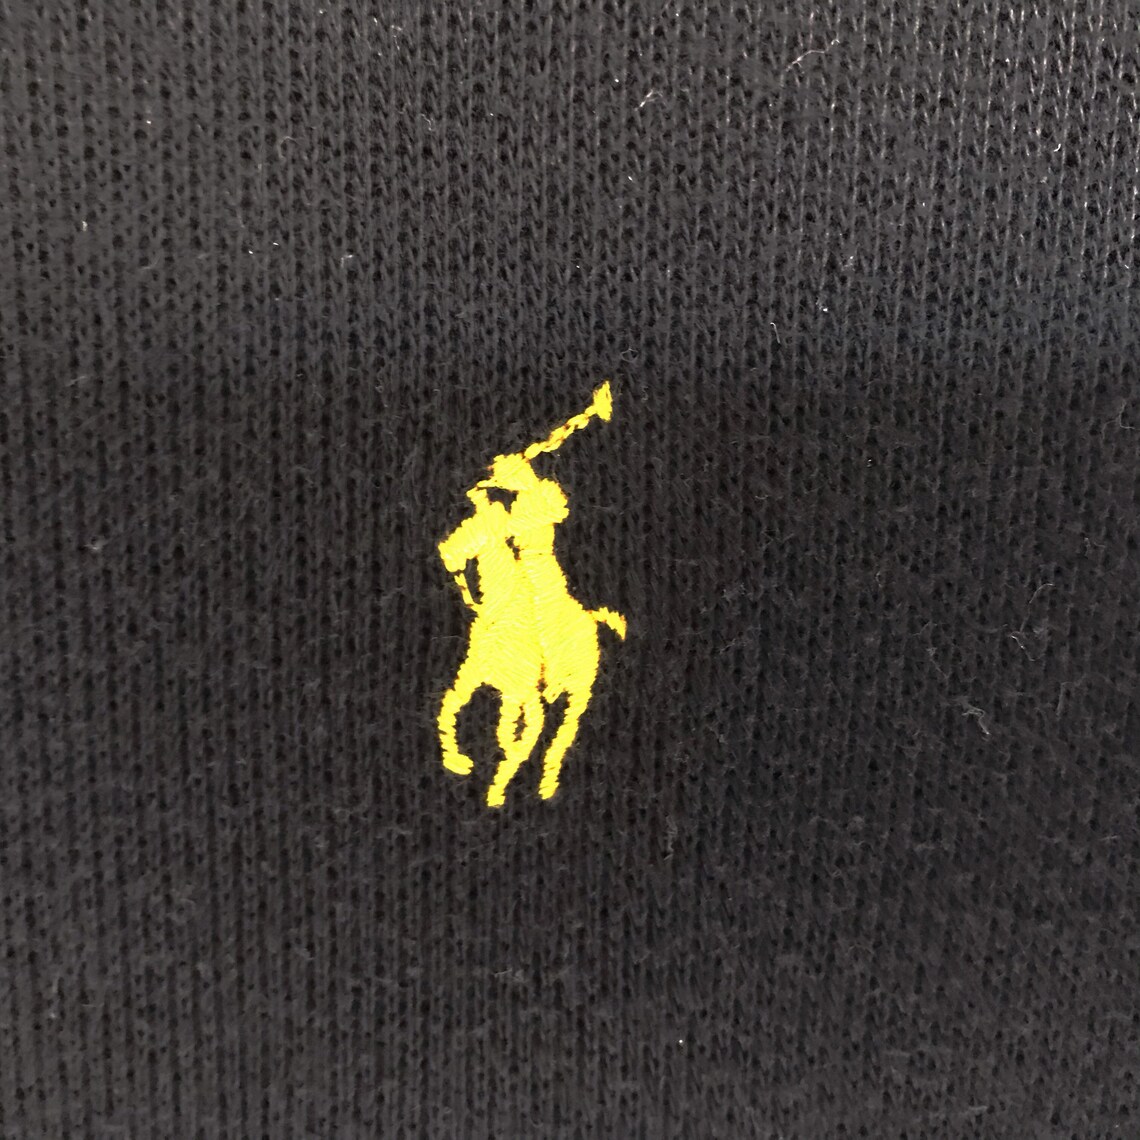 Rare Vintage Polo Ralph Lauren Small Pony embriodery logo | Etsy